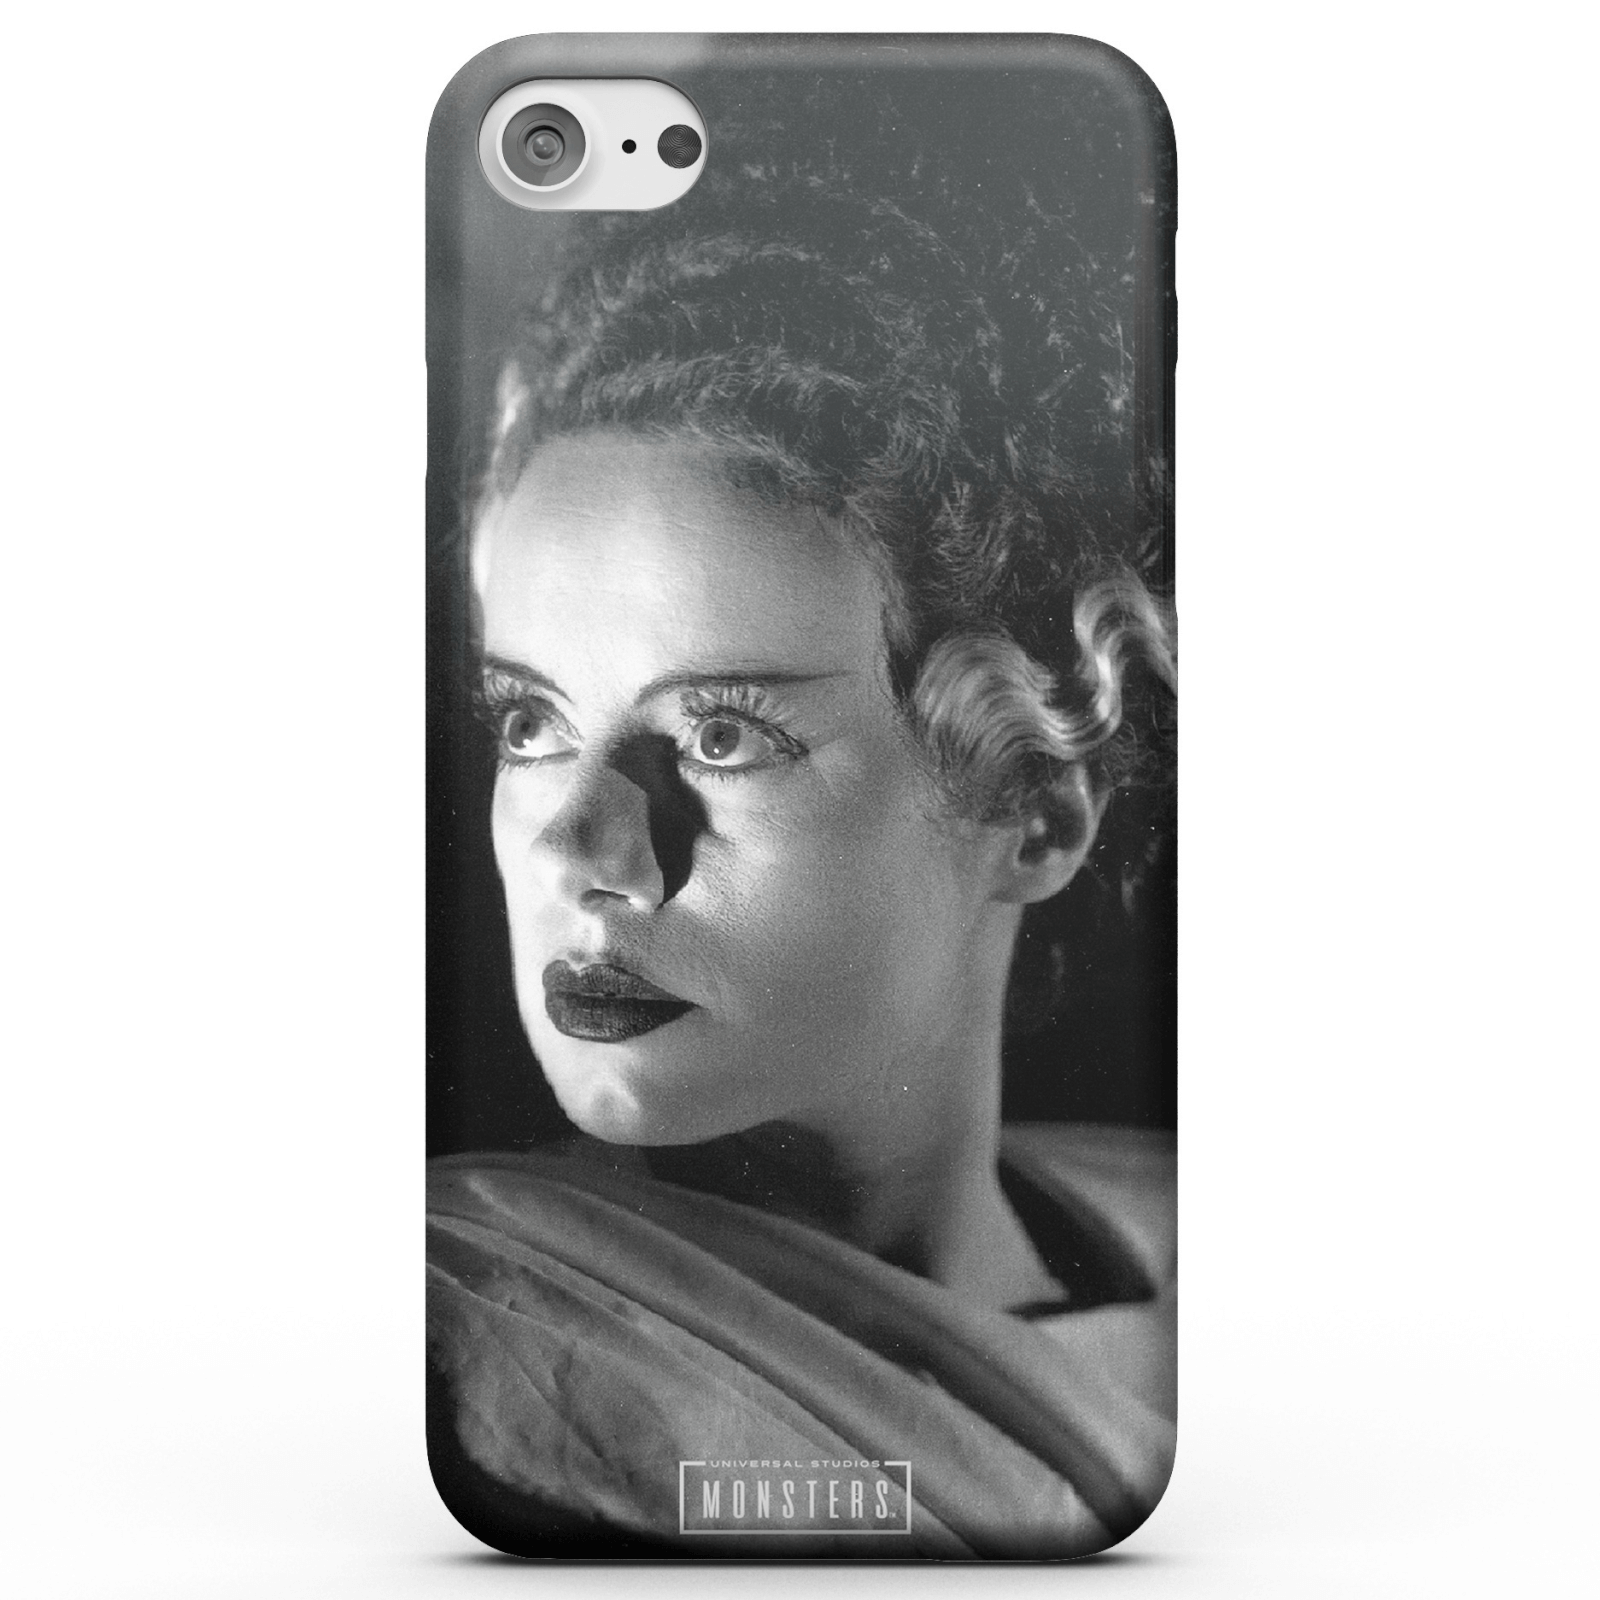 Universal Monsters Bride Of Frankenstein Classic Phone Case for iPhone and Android - Snap Case - Matte